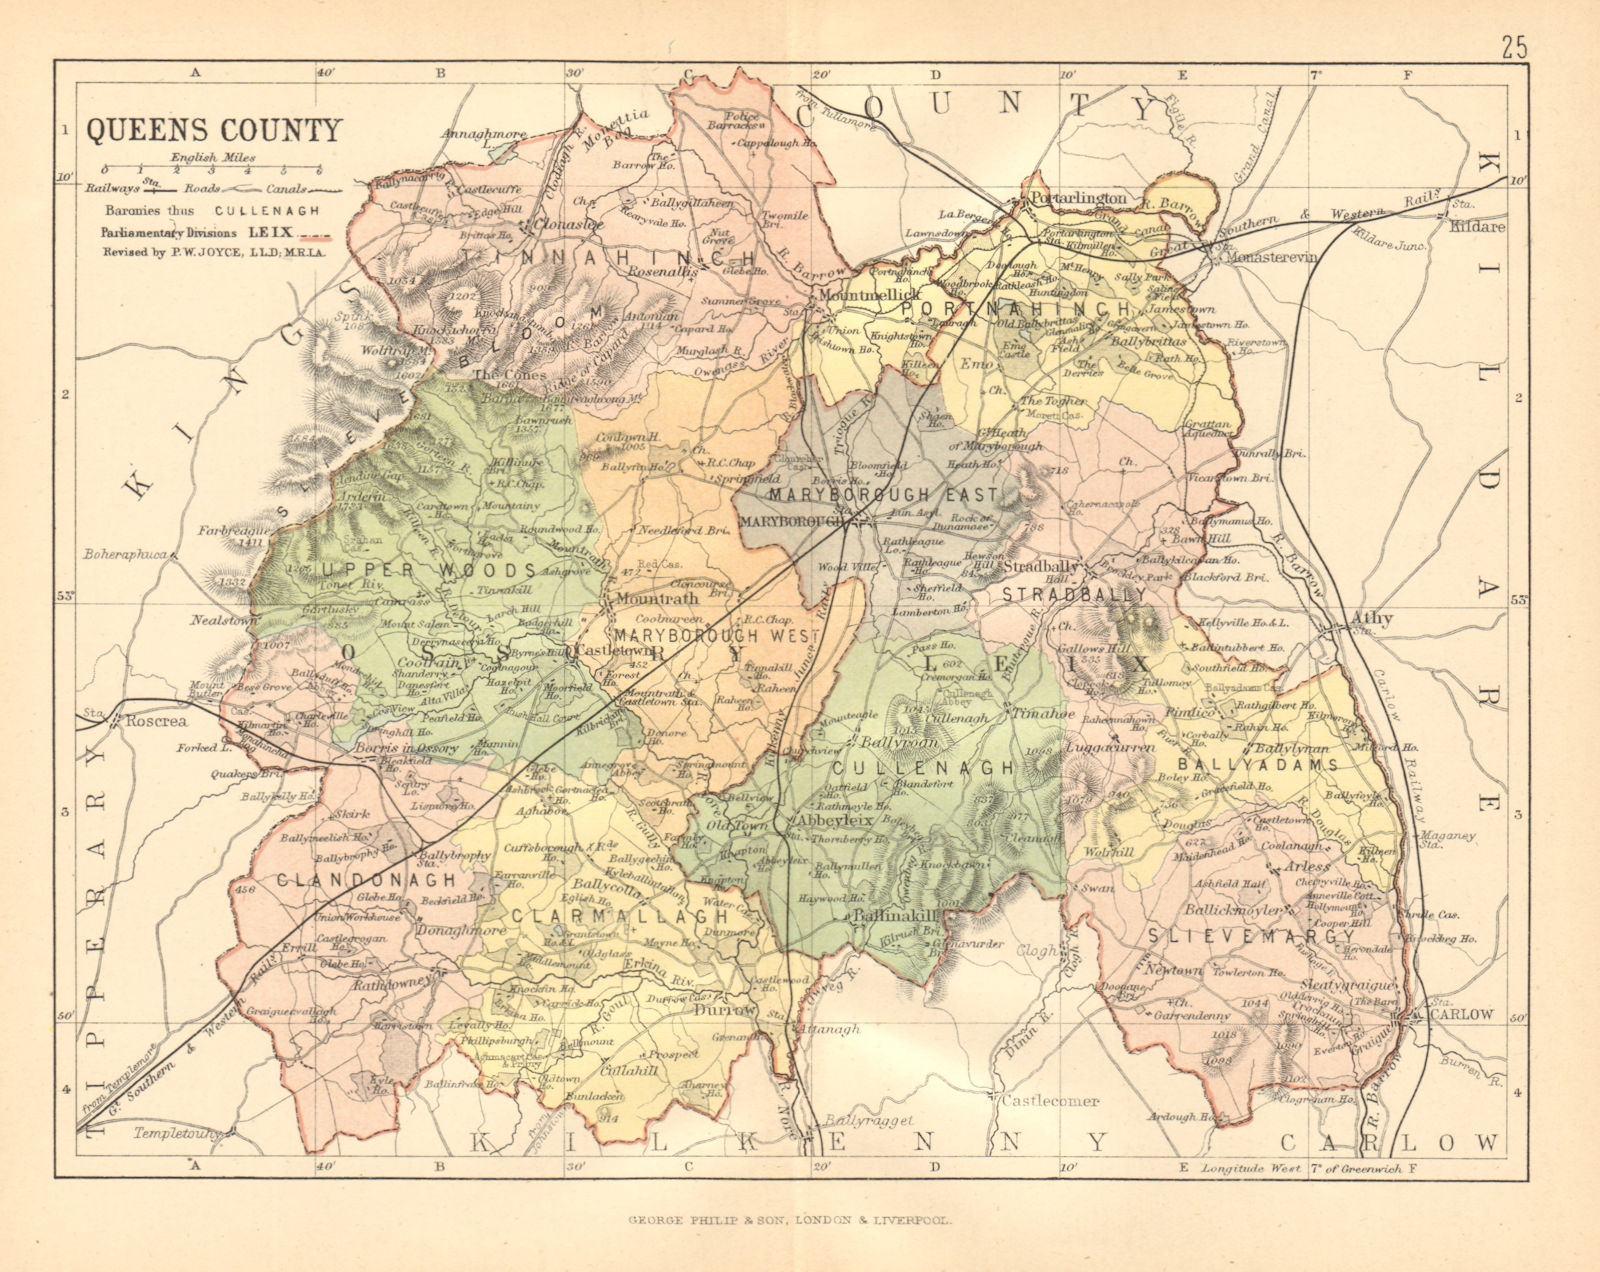 QUEENS COUNTY (LAOIS) . Antique county map. Leinster. Ireland. BARTHOLOMEW c1902